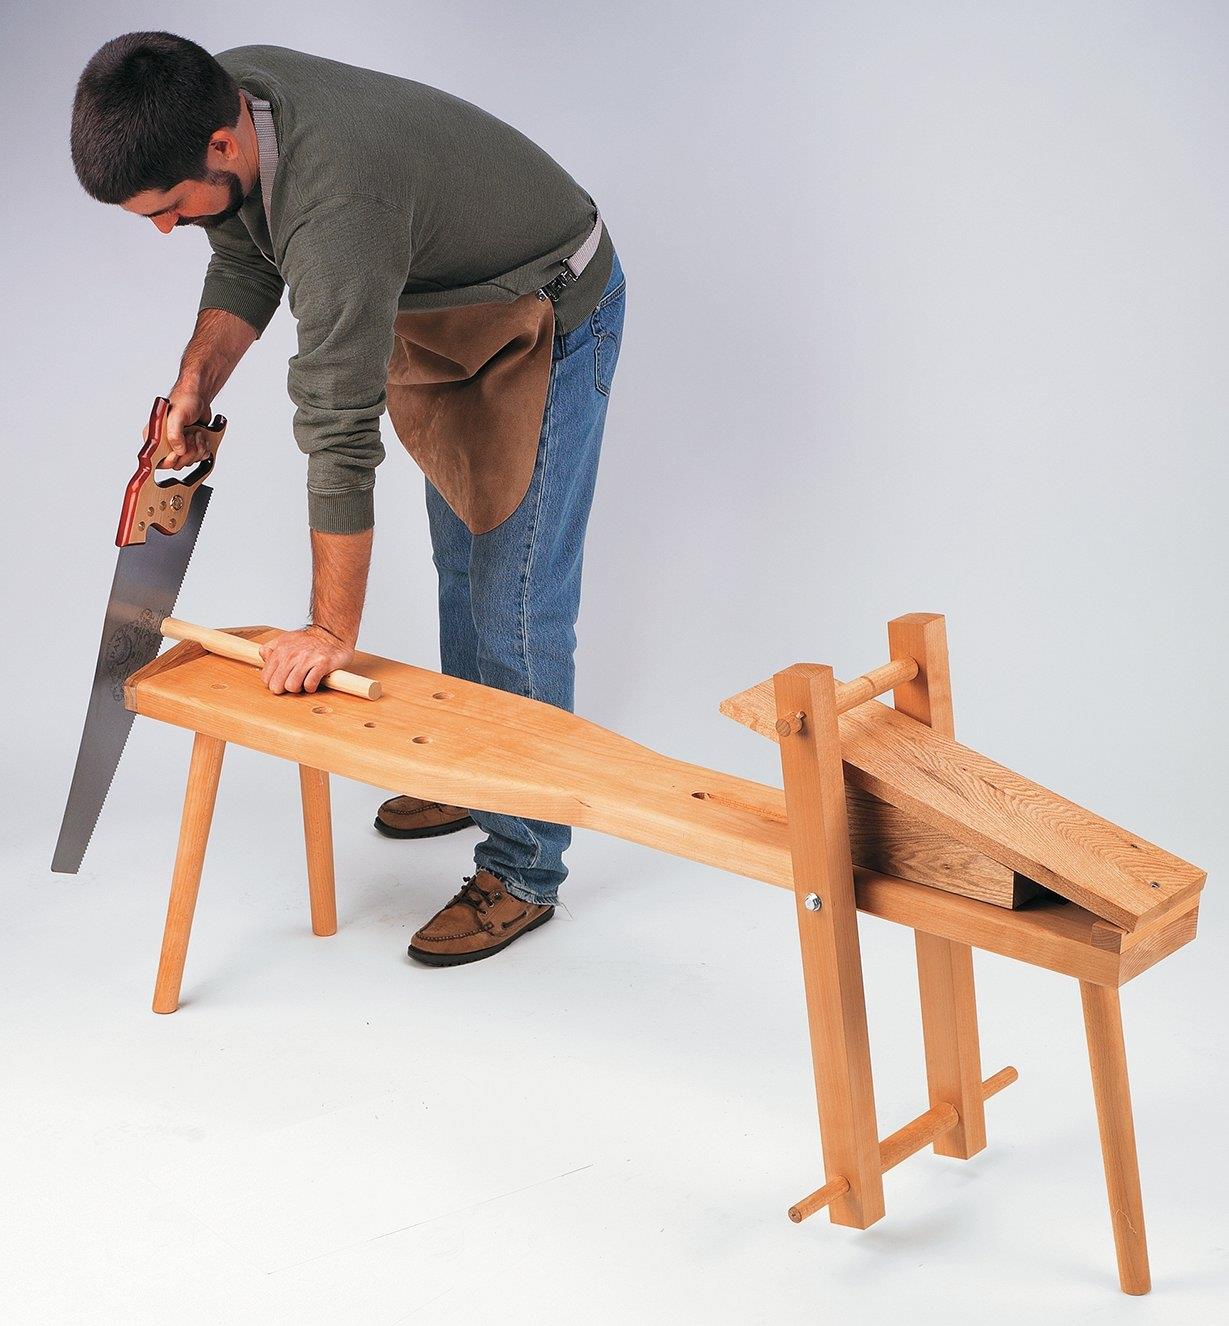 A man uses a shaving horse to saw a dowel